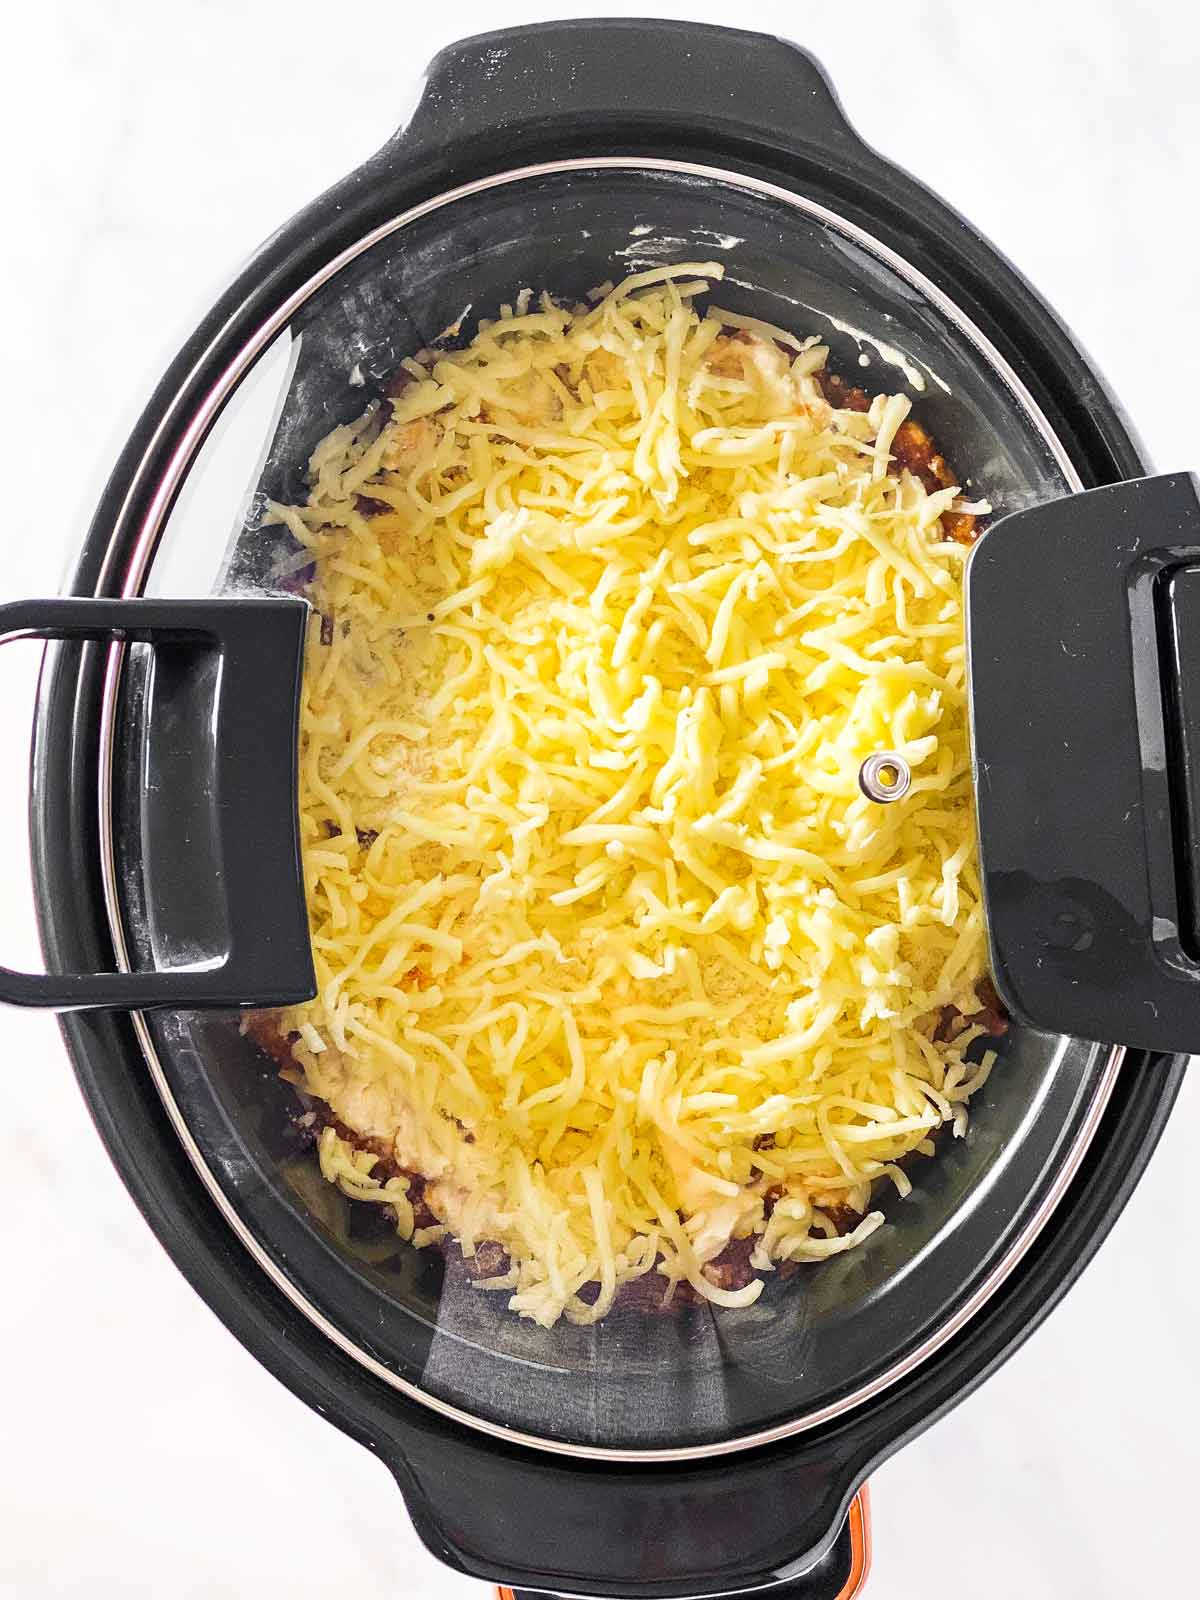 slow cooker with closed lid, shredded mozzarella cheese visible underneath glass lid